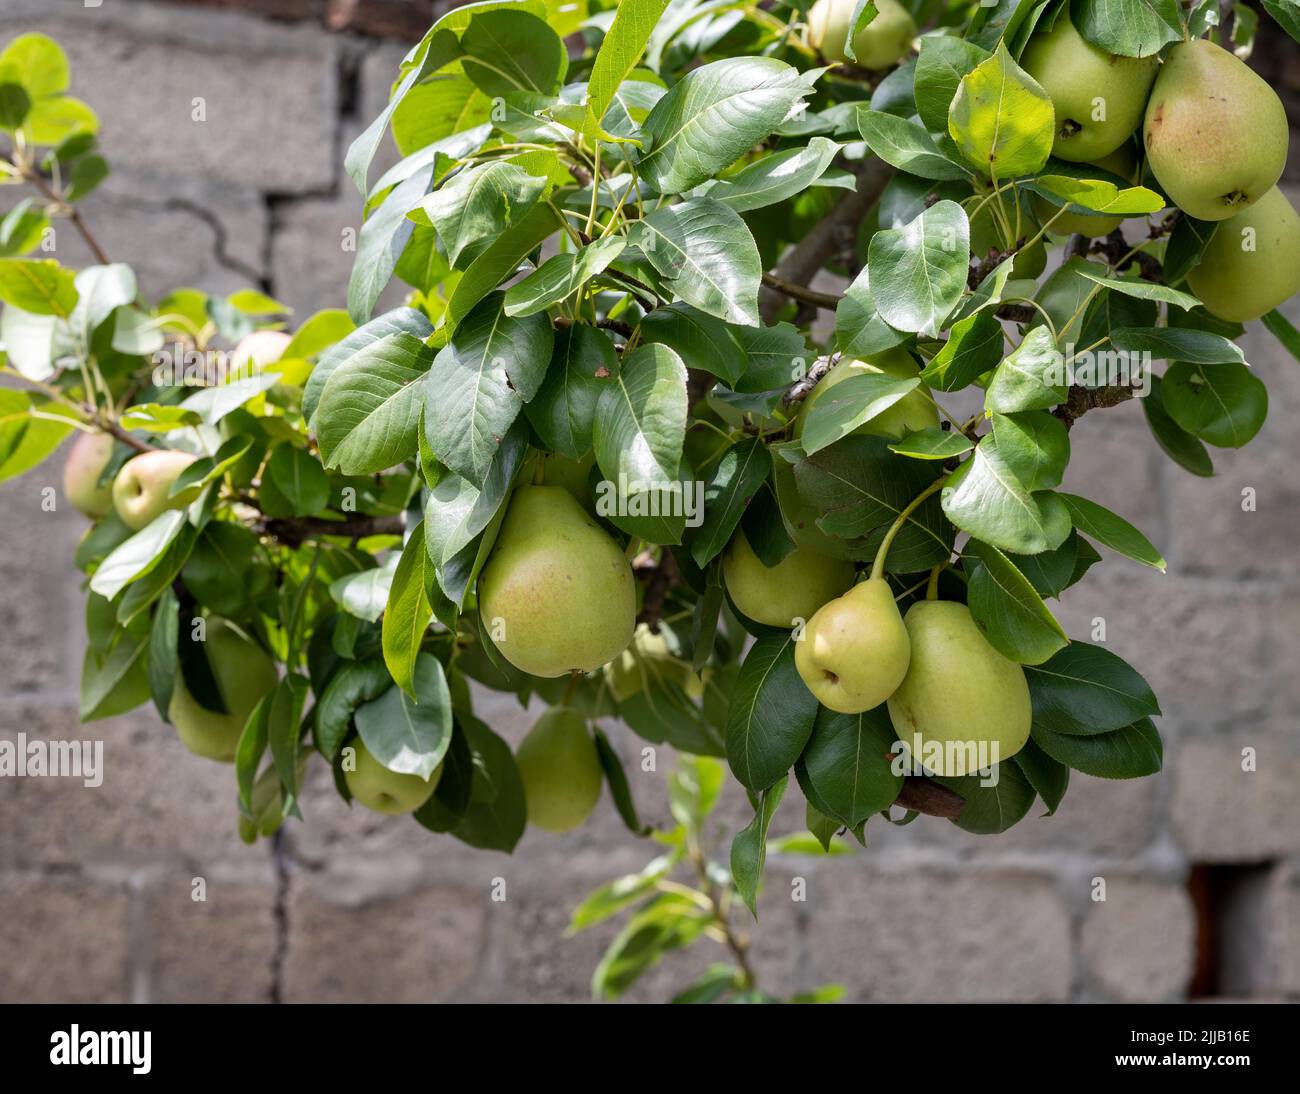 Pear fruit on the tree in a garden Stock Photo